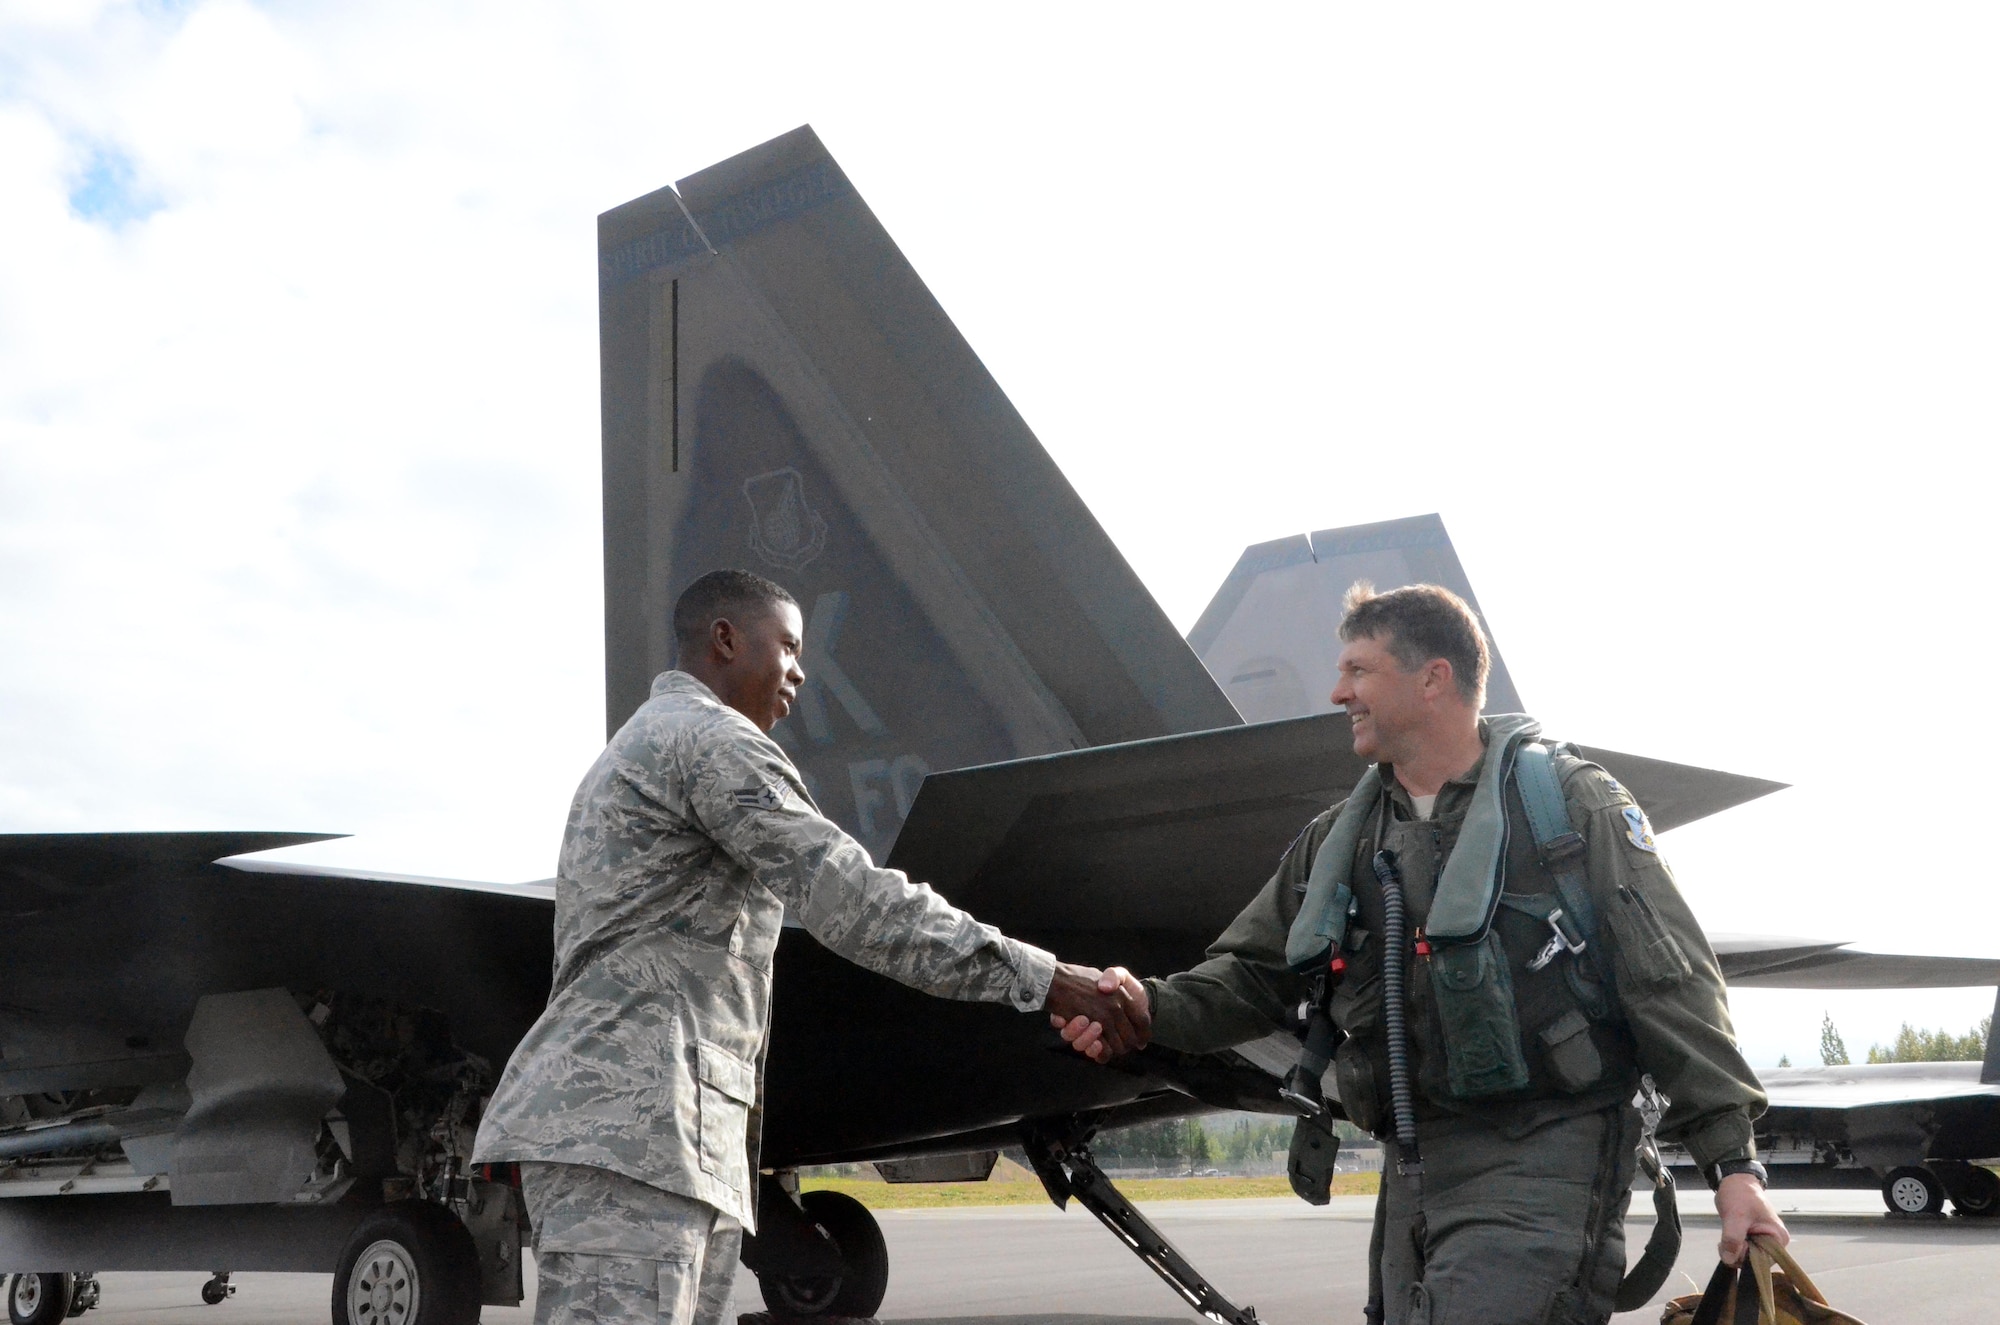 Airman 1st Class Jermaine James, 477th Aircraft Maintenance Squadron F-22 crew chief, greets Col. Tyler Otten, 477th Fighter Group commander before his flight here July 31. This was the first time tail number 147 has flown after being transformed into the 477th Fighter Group flagship.  The words “Spirit of Tuskegee” painted across the tail, a nod to the units Tuskegee Airmen heritage.  The Reserve 477th Fighter Group was previously the 477th Bombardment Group, a Tuskegee unit activated in 1944. The group's 302nd Fighter Squadron historically was part of the 332nd Fighter Group, also known as "The Redtails" the famous all-black unit that fought both American prejudice and the axis powers in Europe.  (U.S. Air Force/ Tech. Sgt. Andy Eichorst)